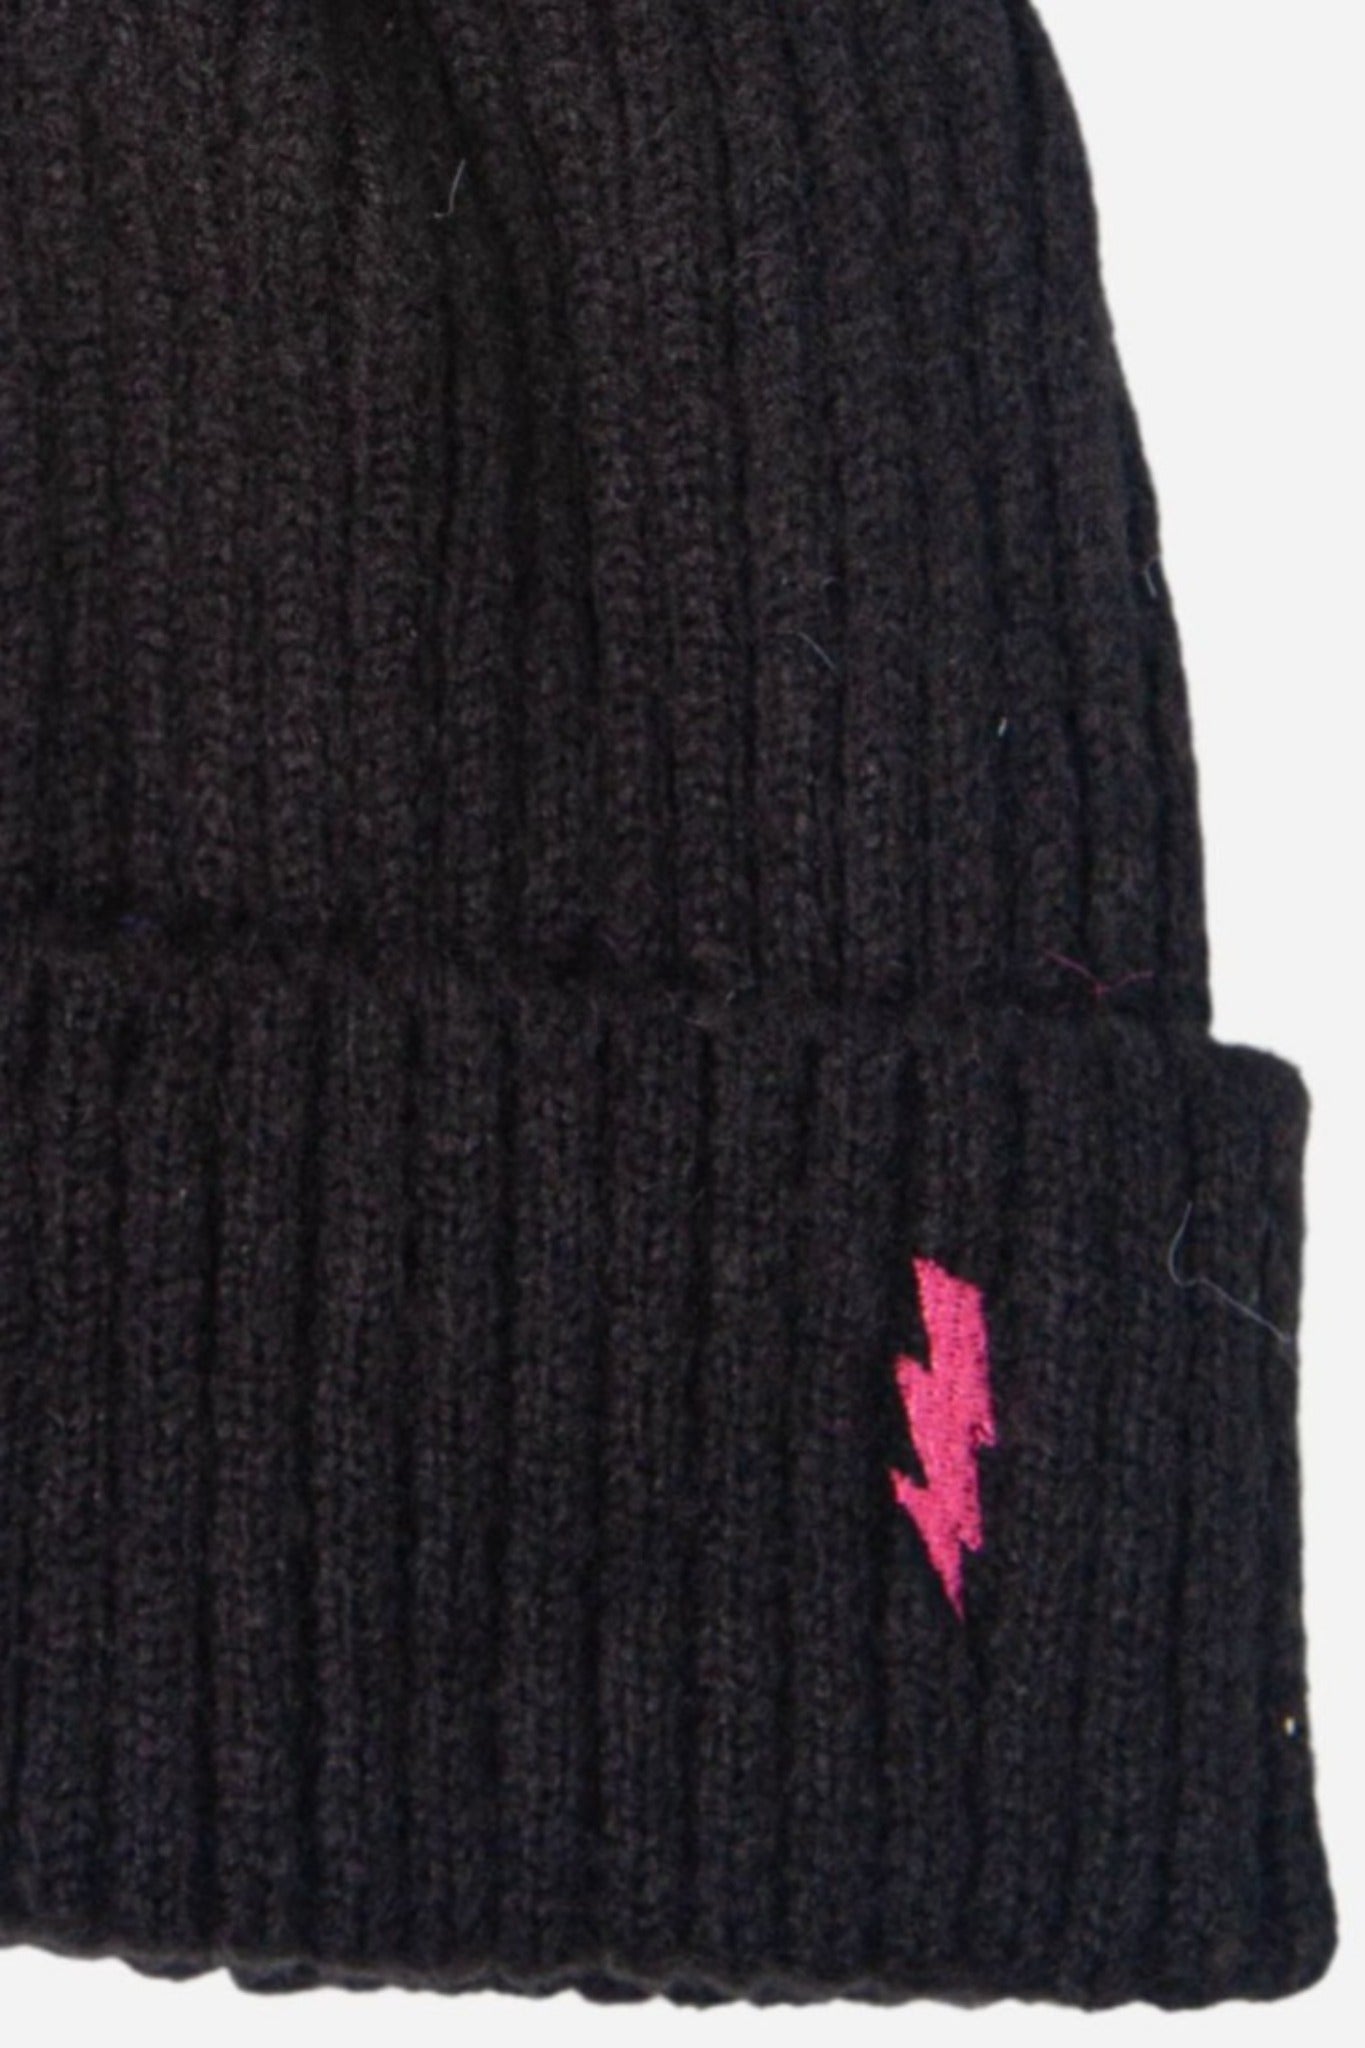 close up of the ribbed knitted material and fuchsia pink lightning bolt